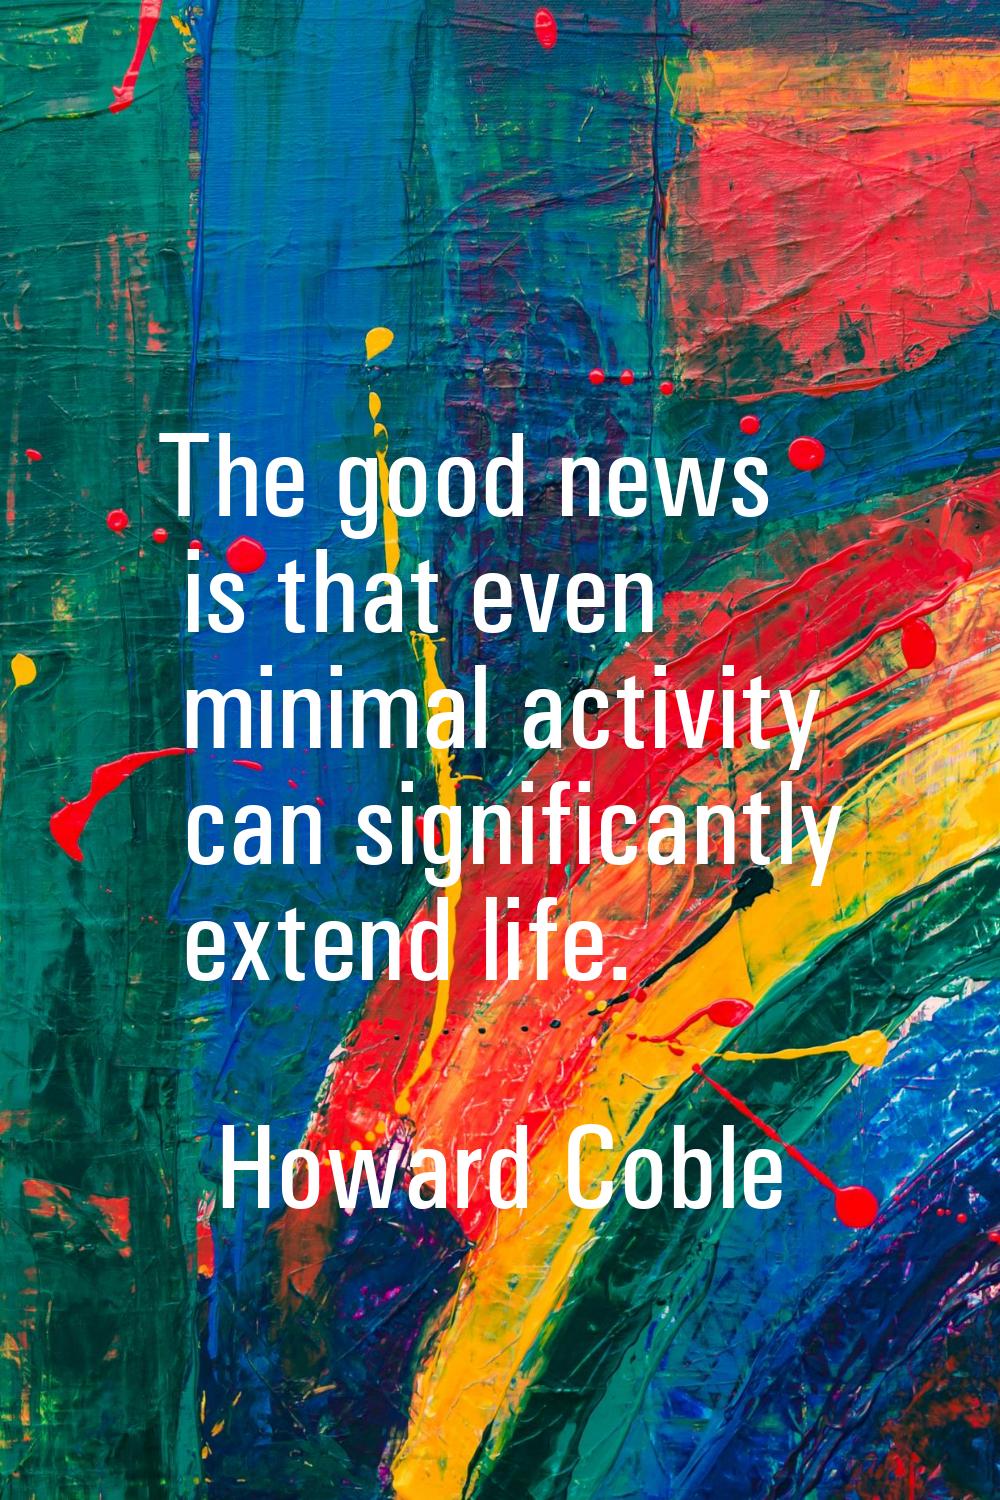 The good news is that even minimal activity can significantly extend life.